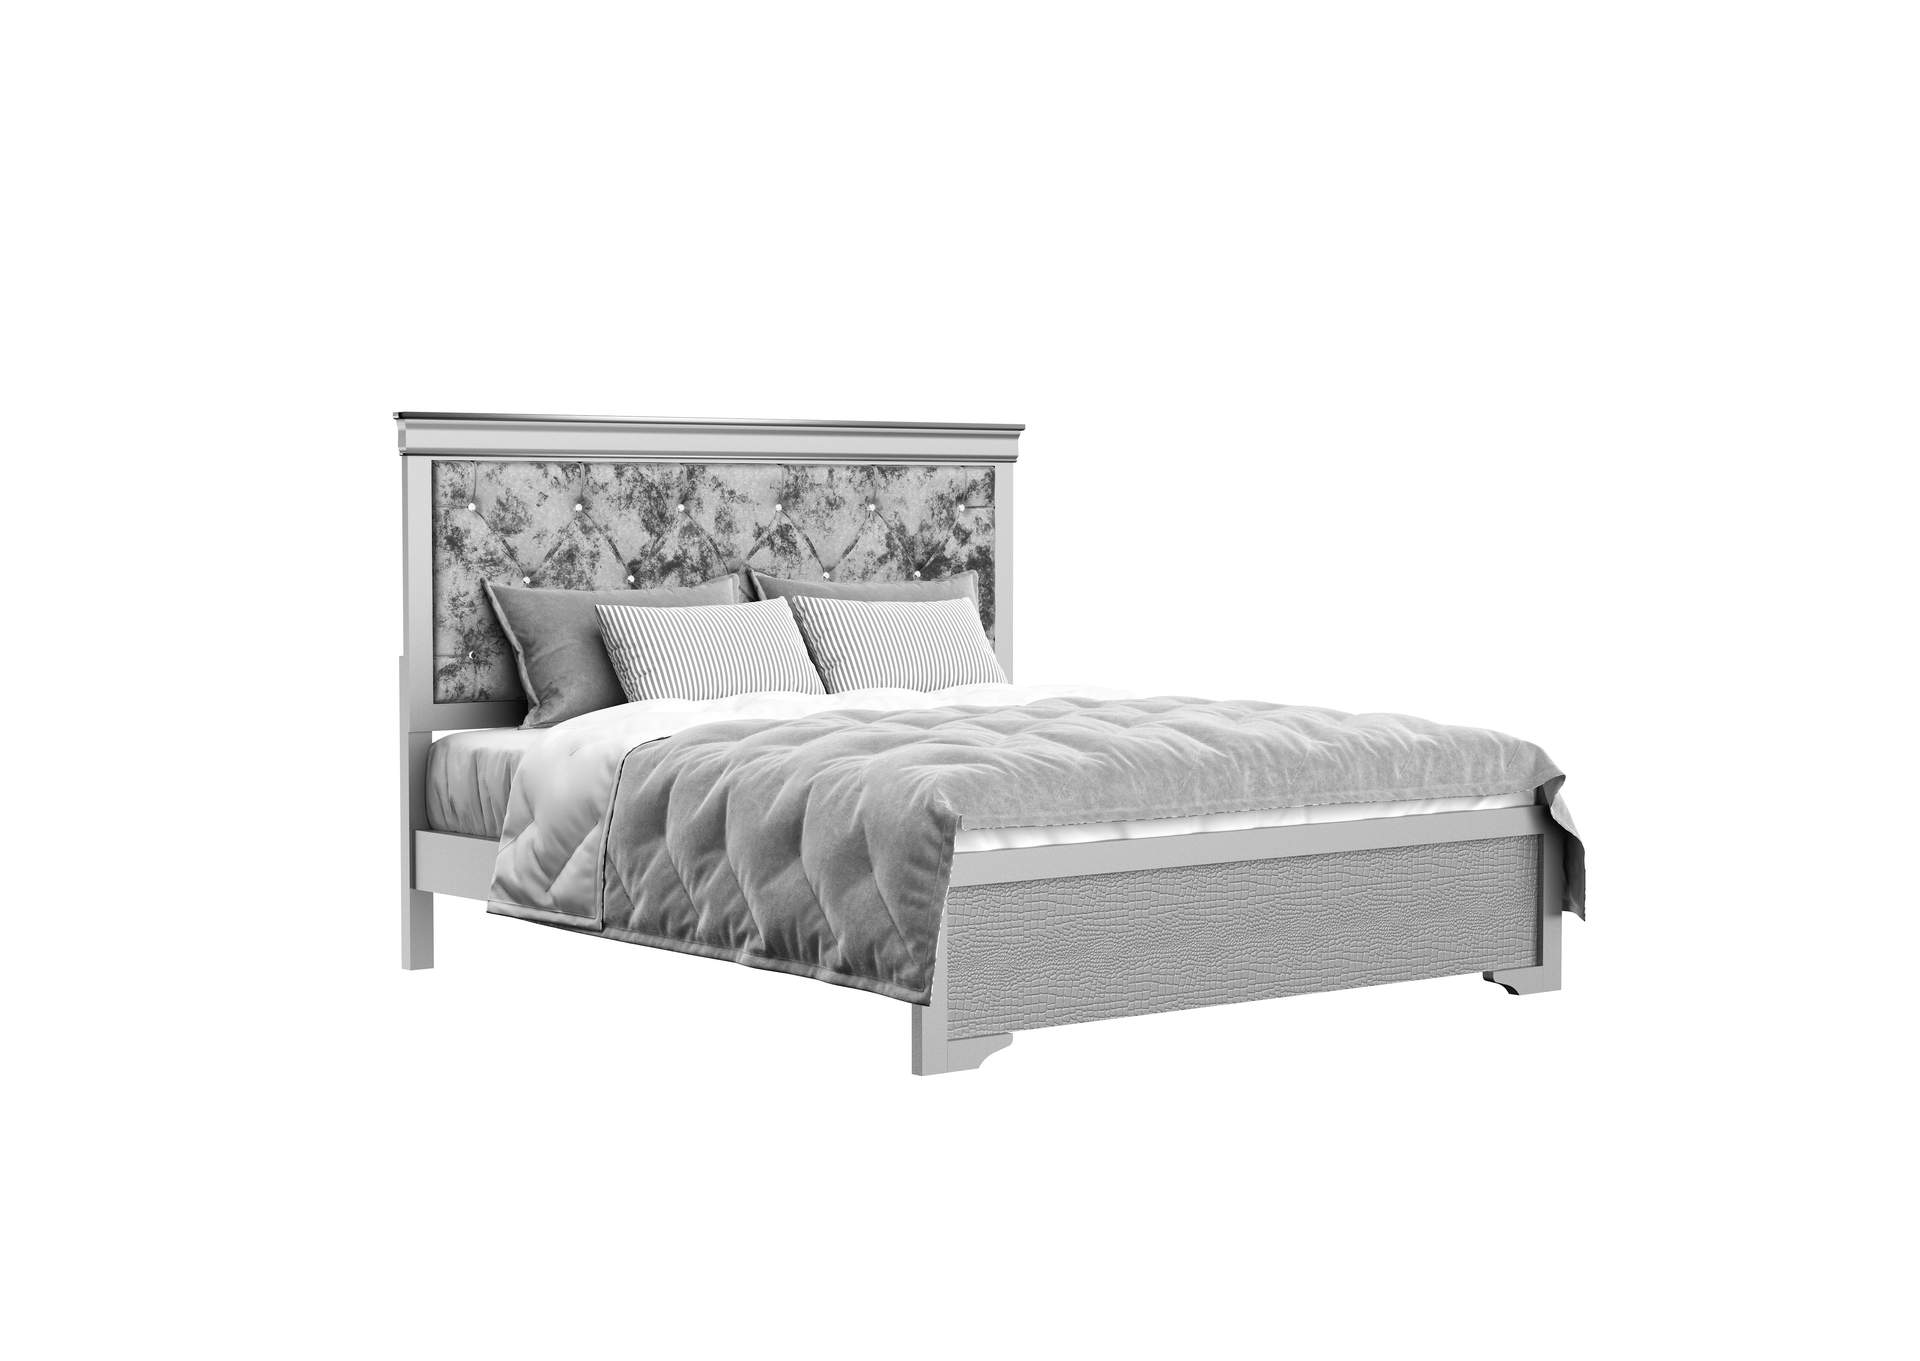 Silver Verona King Bed Best, Verona King Size Bed